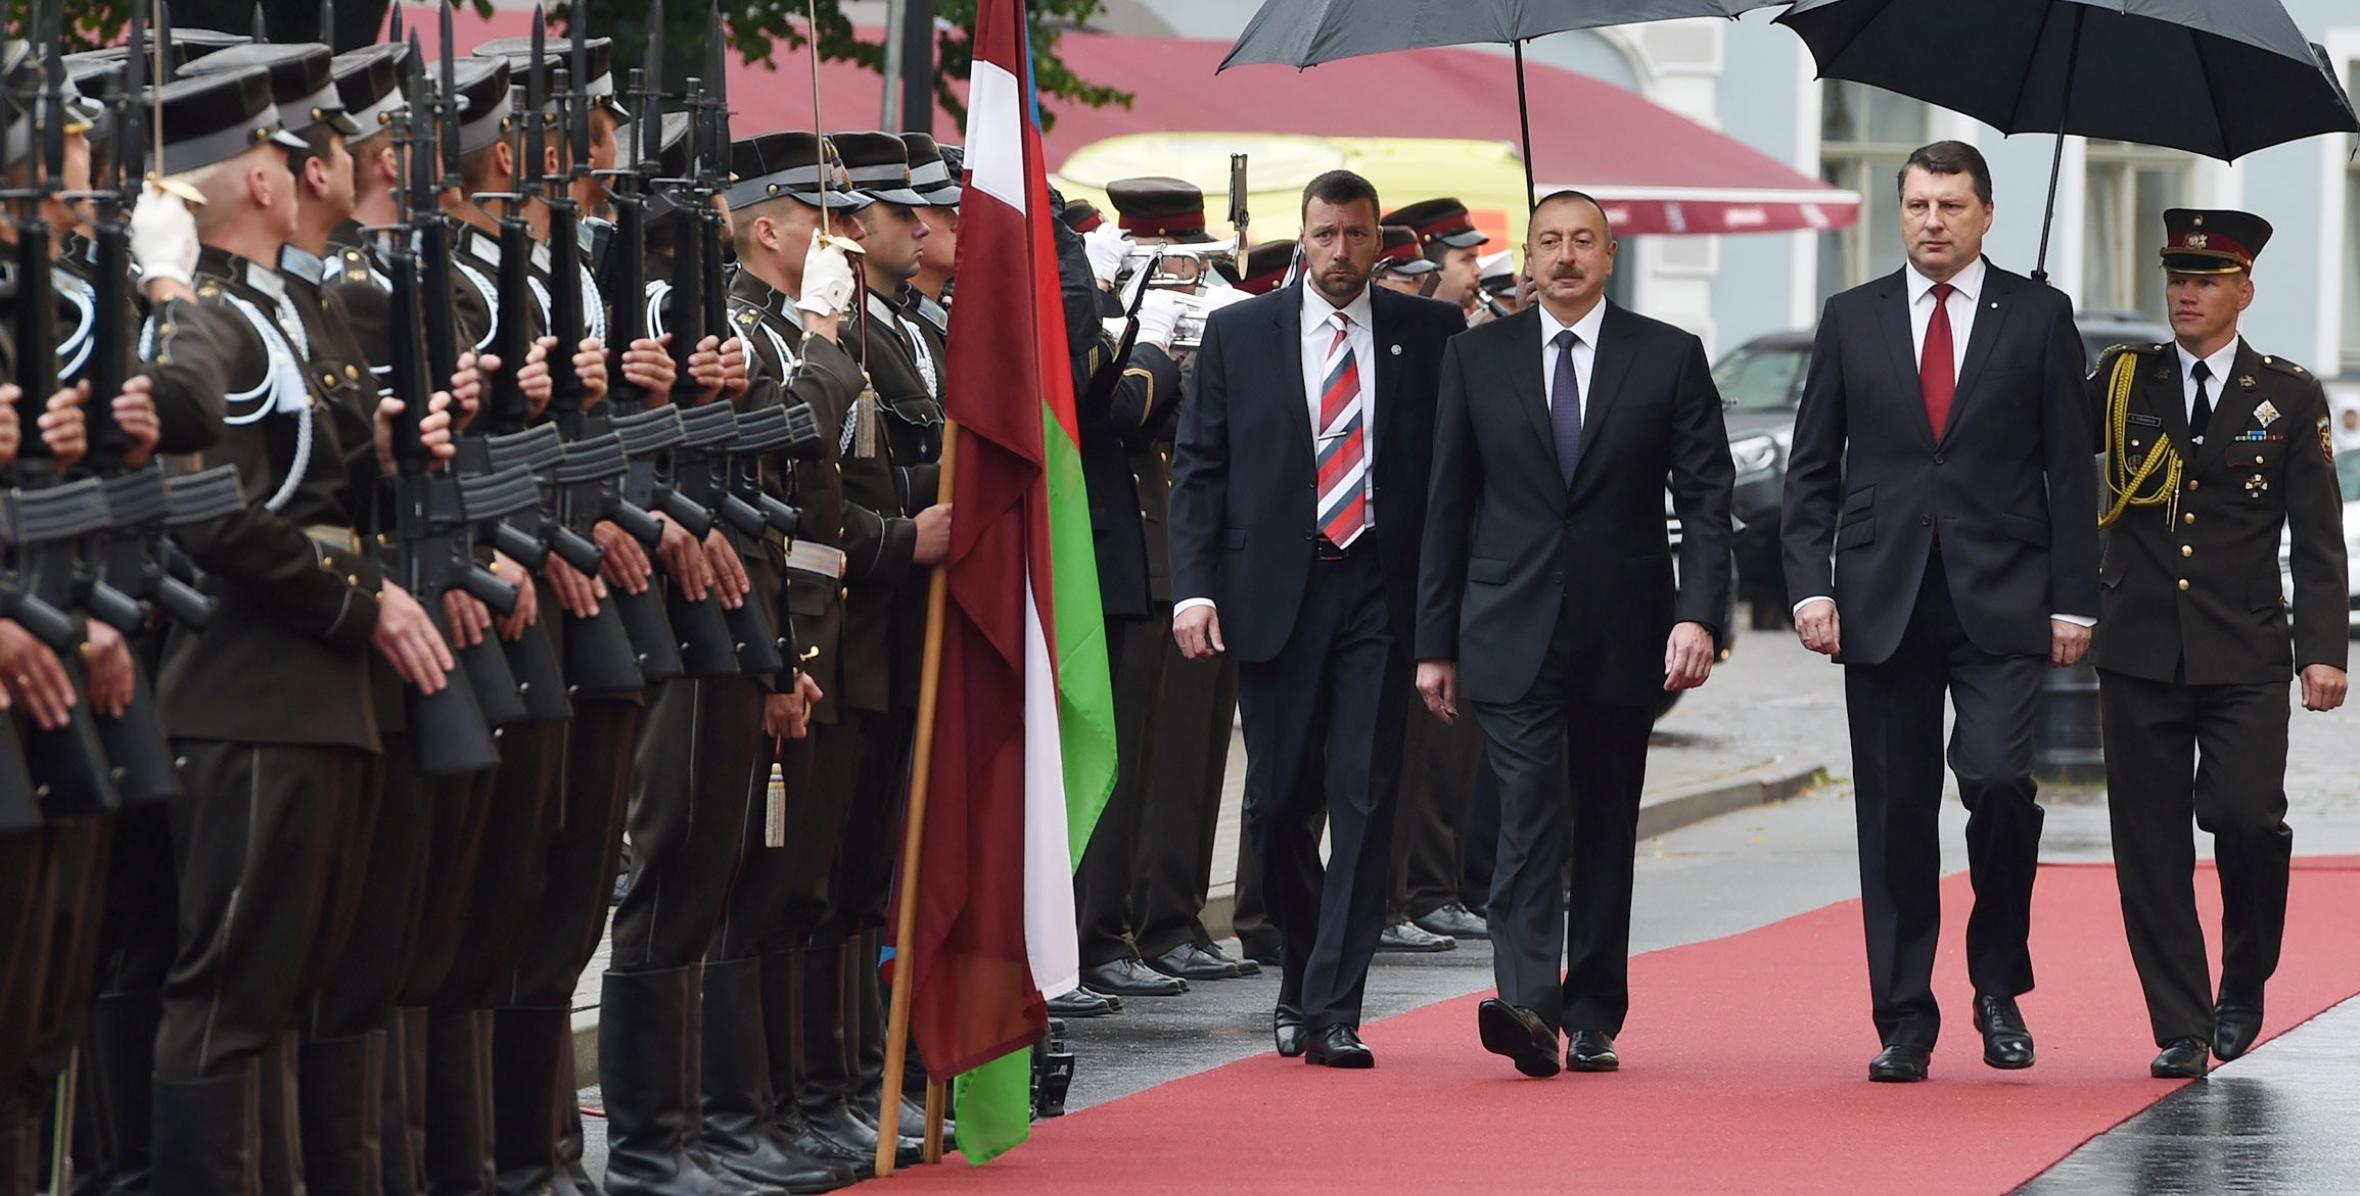 Official visit of Ilham Aliyev to Latvia